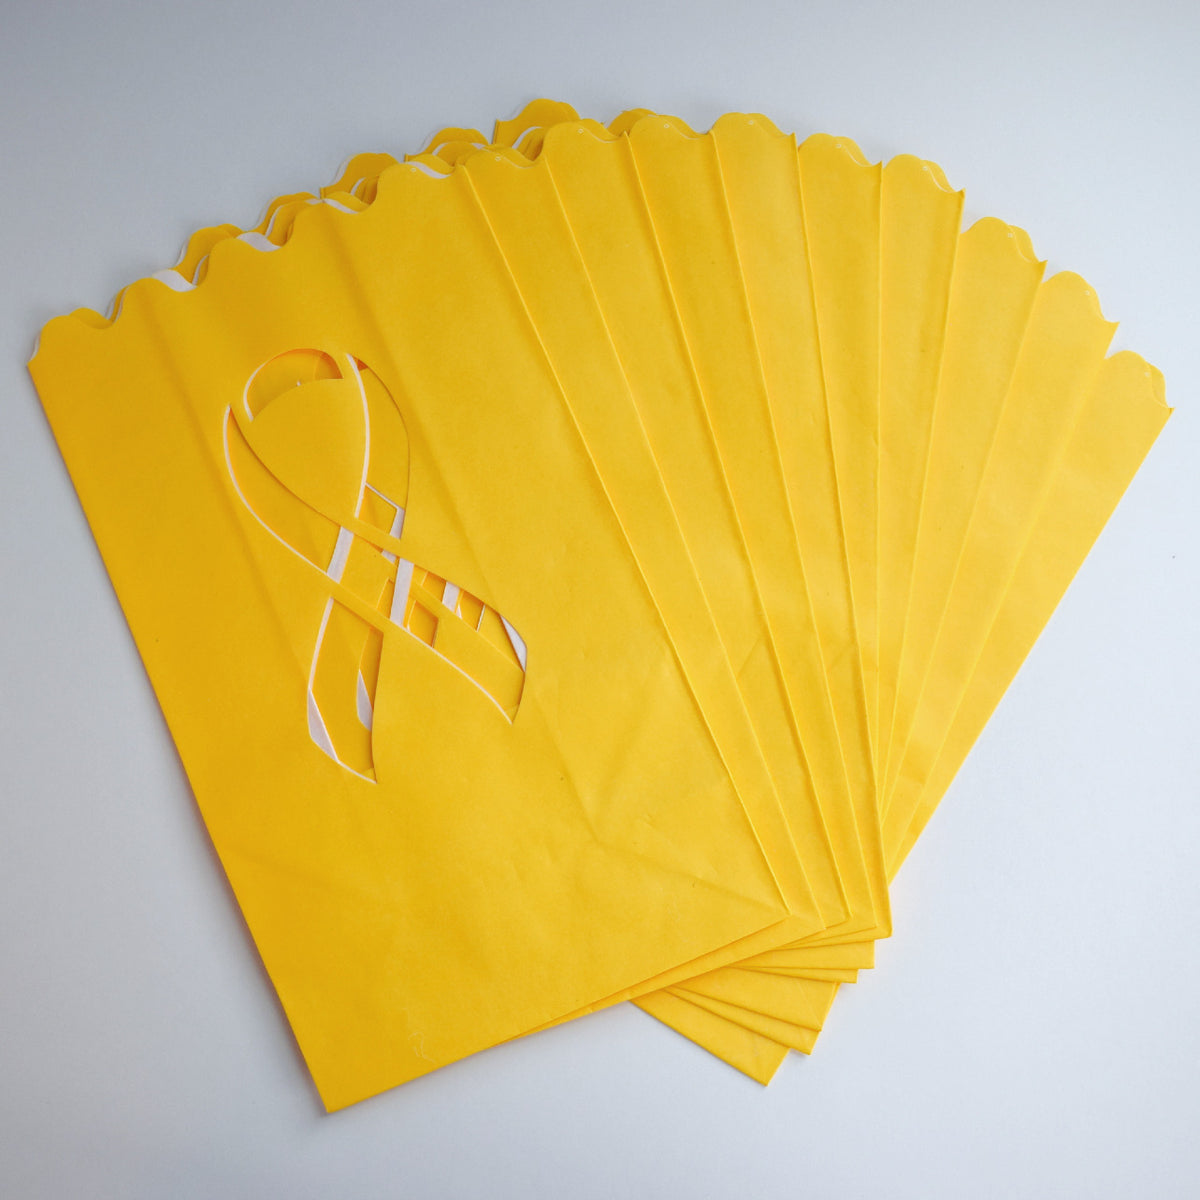 Yellow Breast Cancer Awareness Luminary Bags (Set of 10)